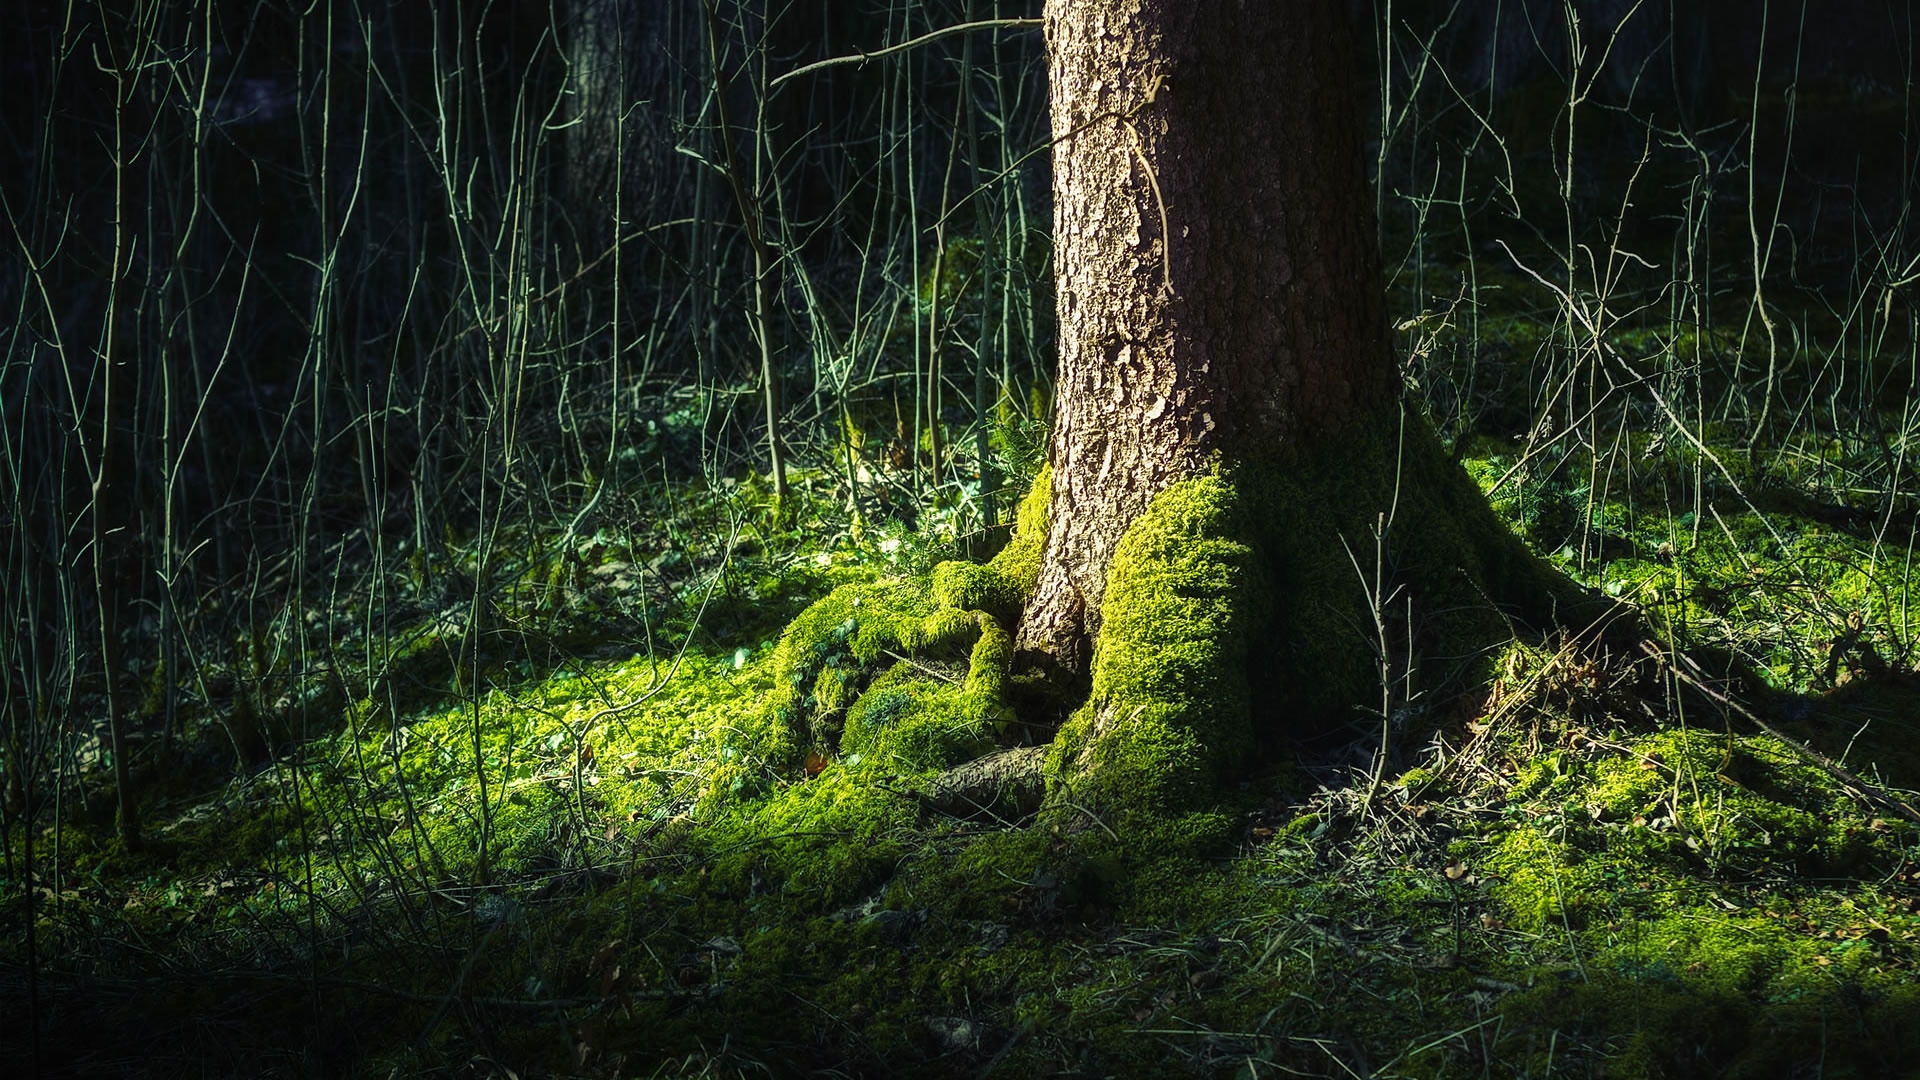 Trunk surrounded by grass for 1920 x 1080 HDTV 1080p resolution